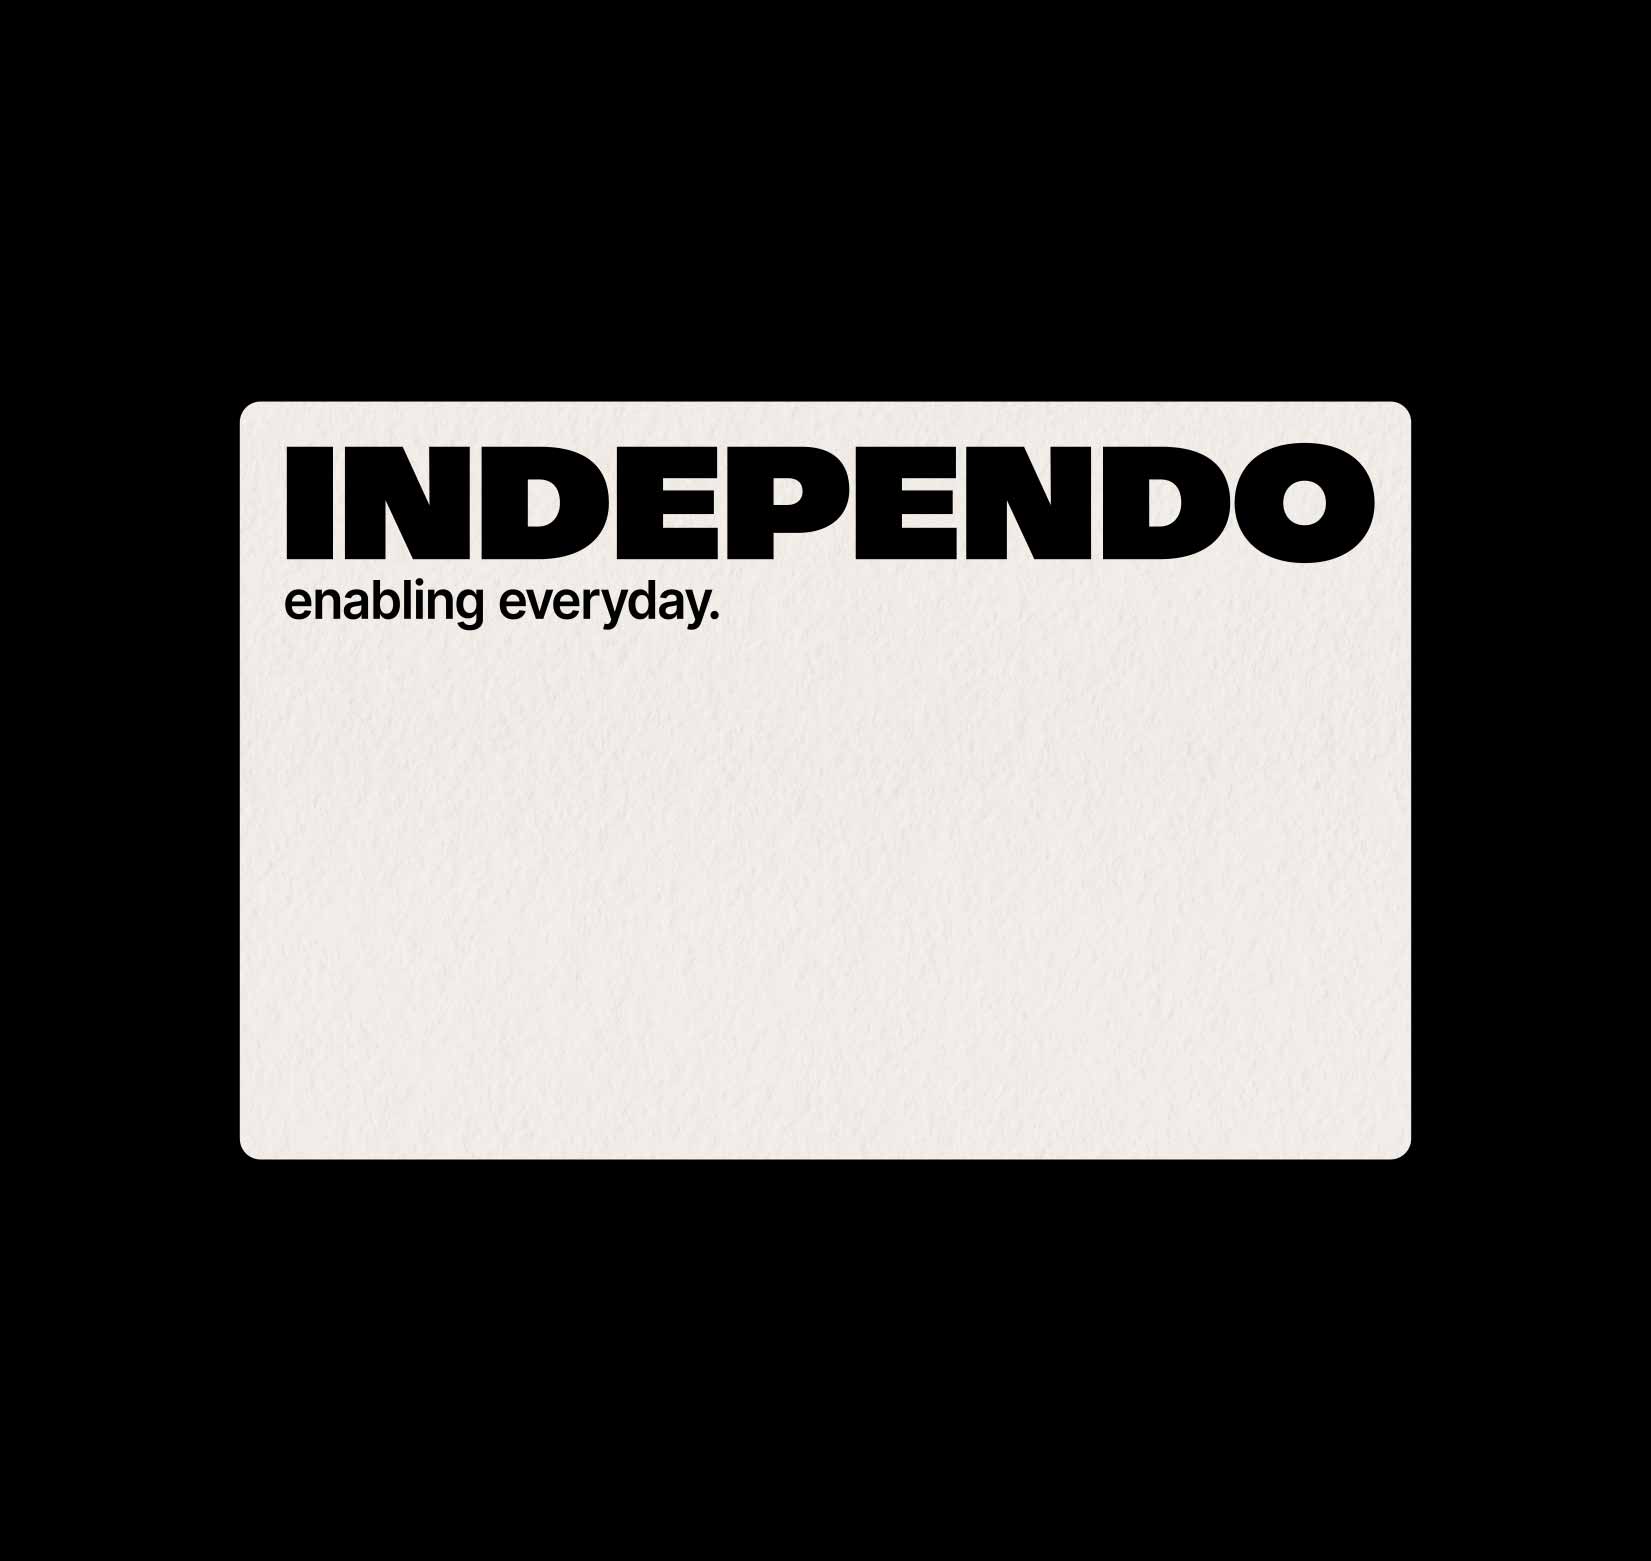 Independo. Making the digital world more accessible.